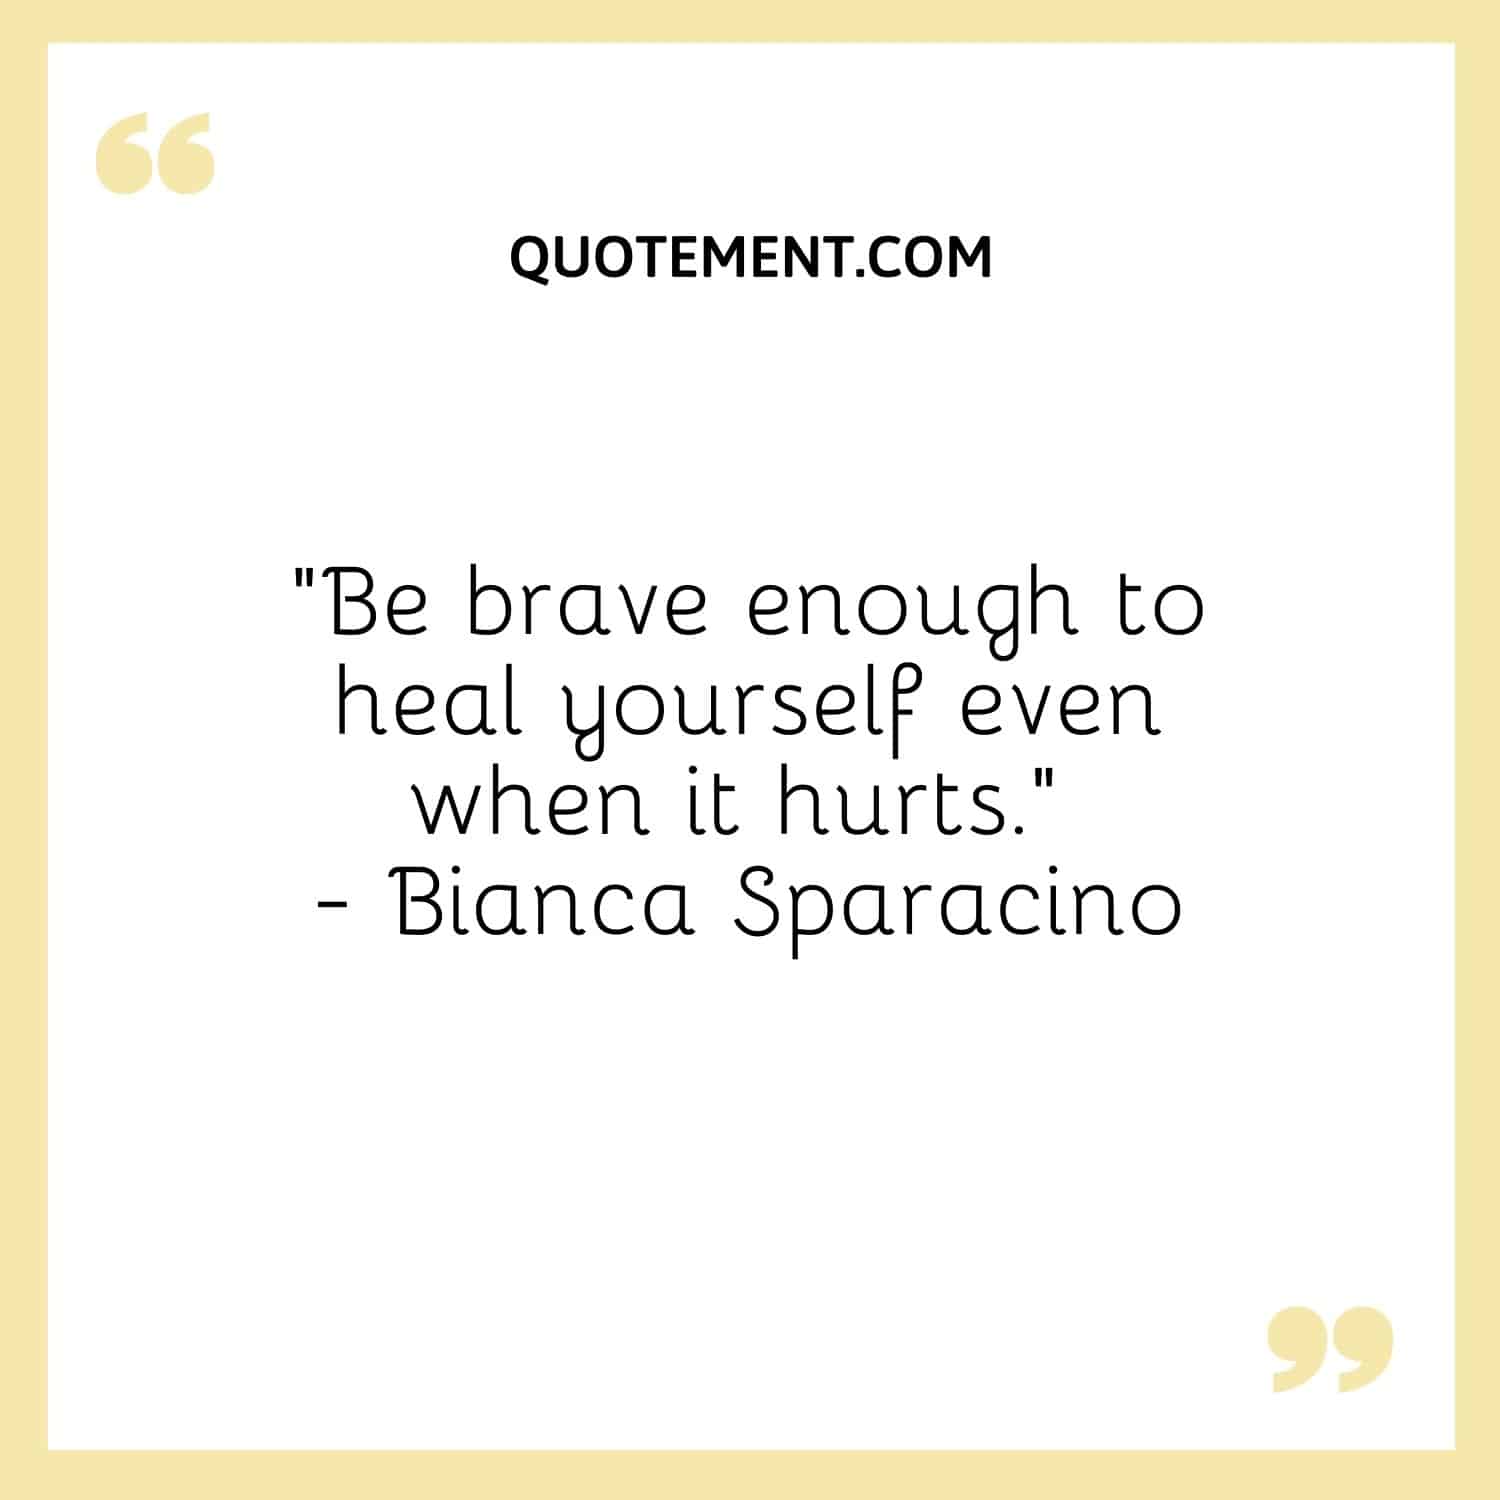 Be brave enough to heal yourself even when it hurts